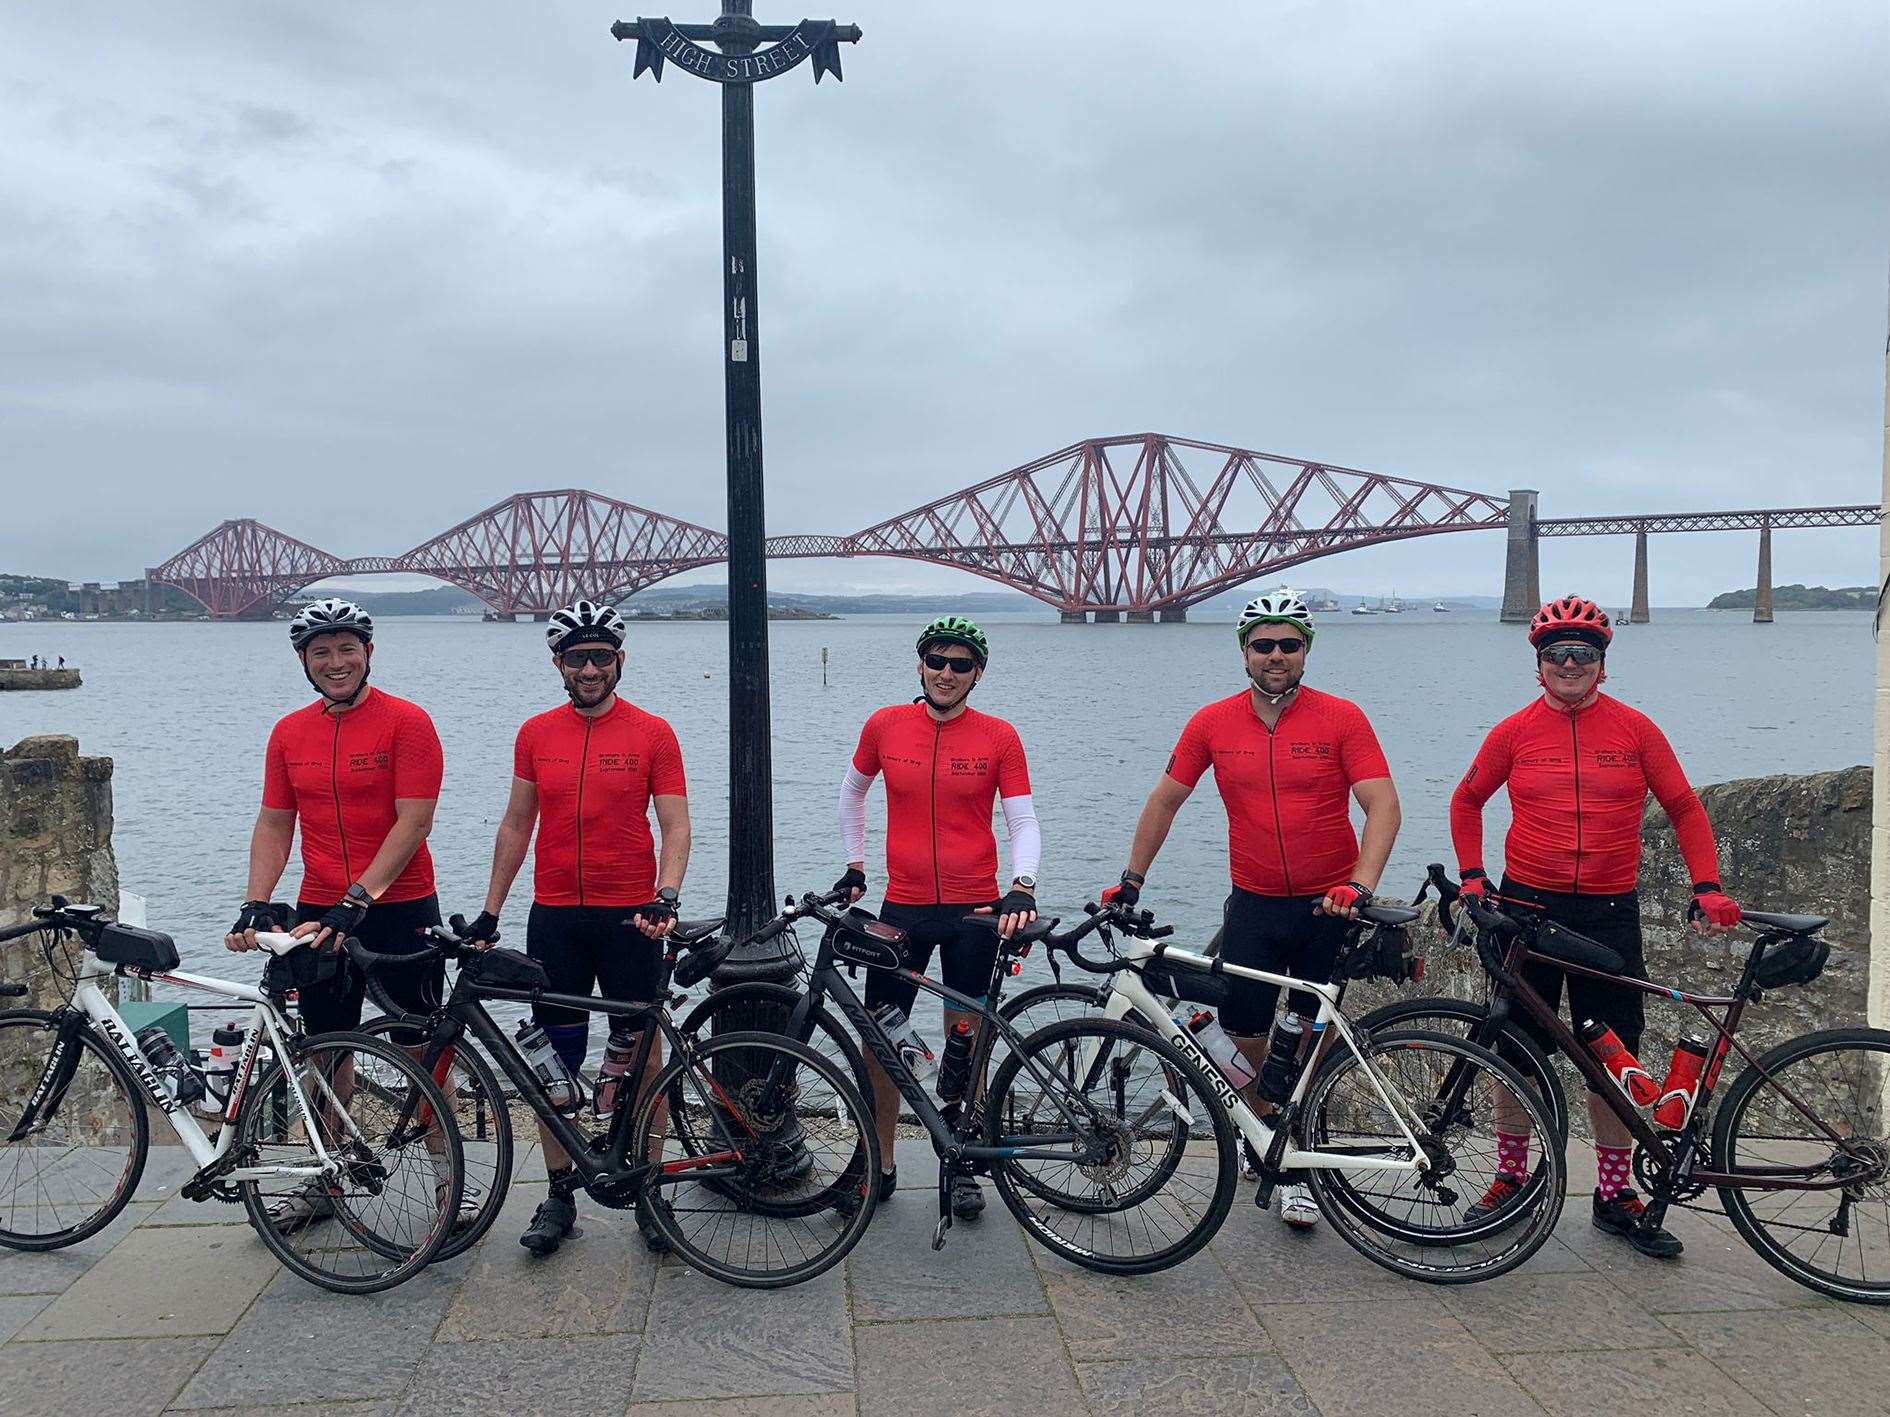 The charity cyclists knew the end was close when they saw the Forth Bridge.